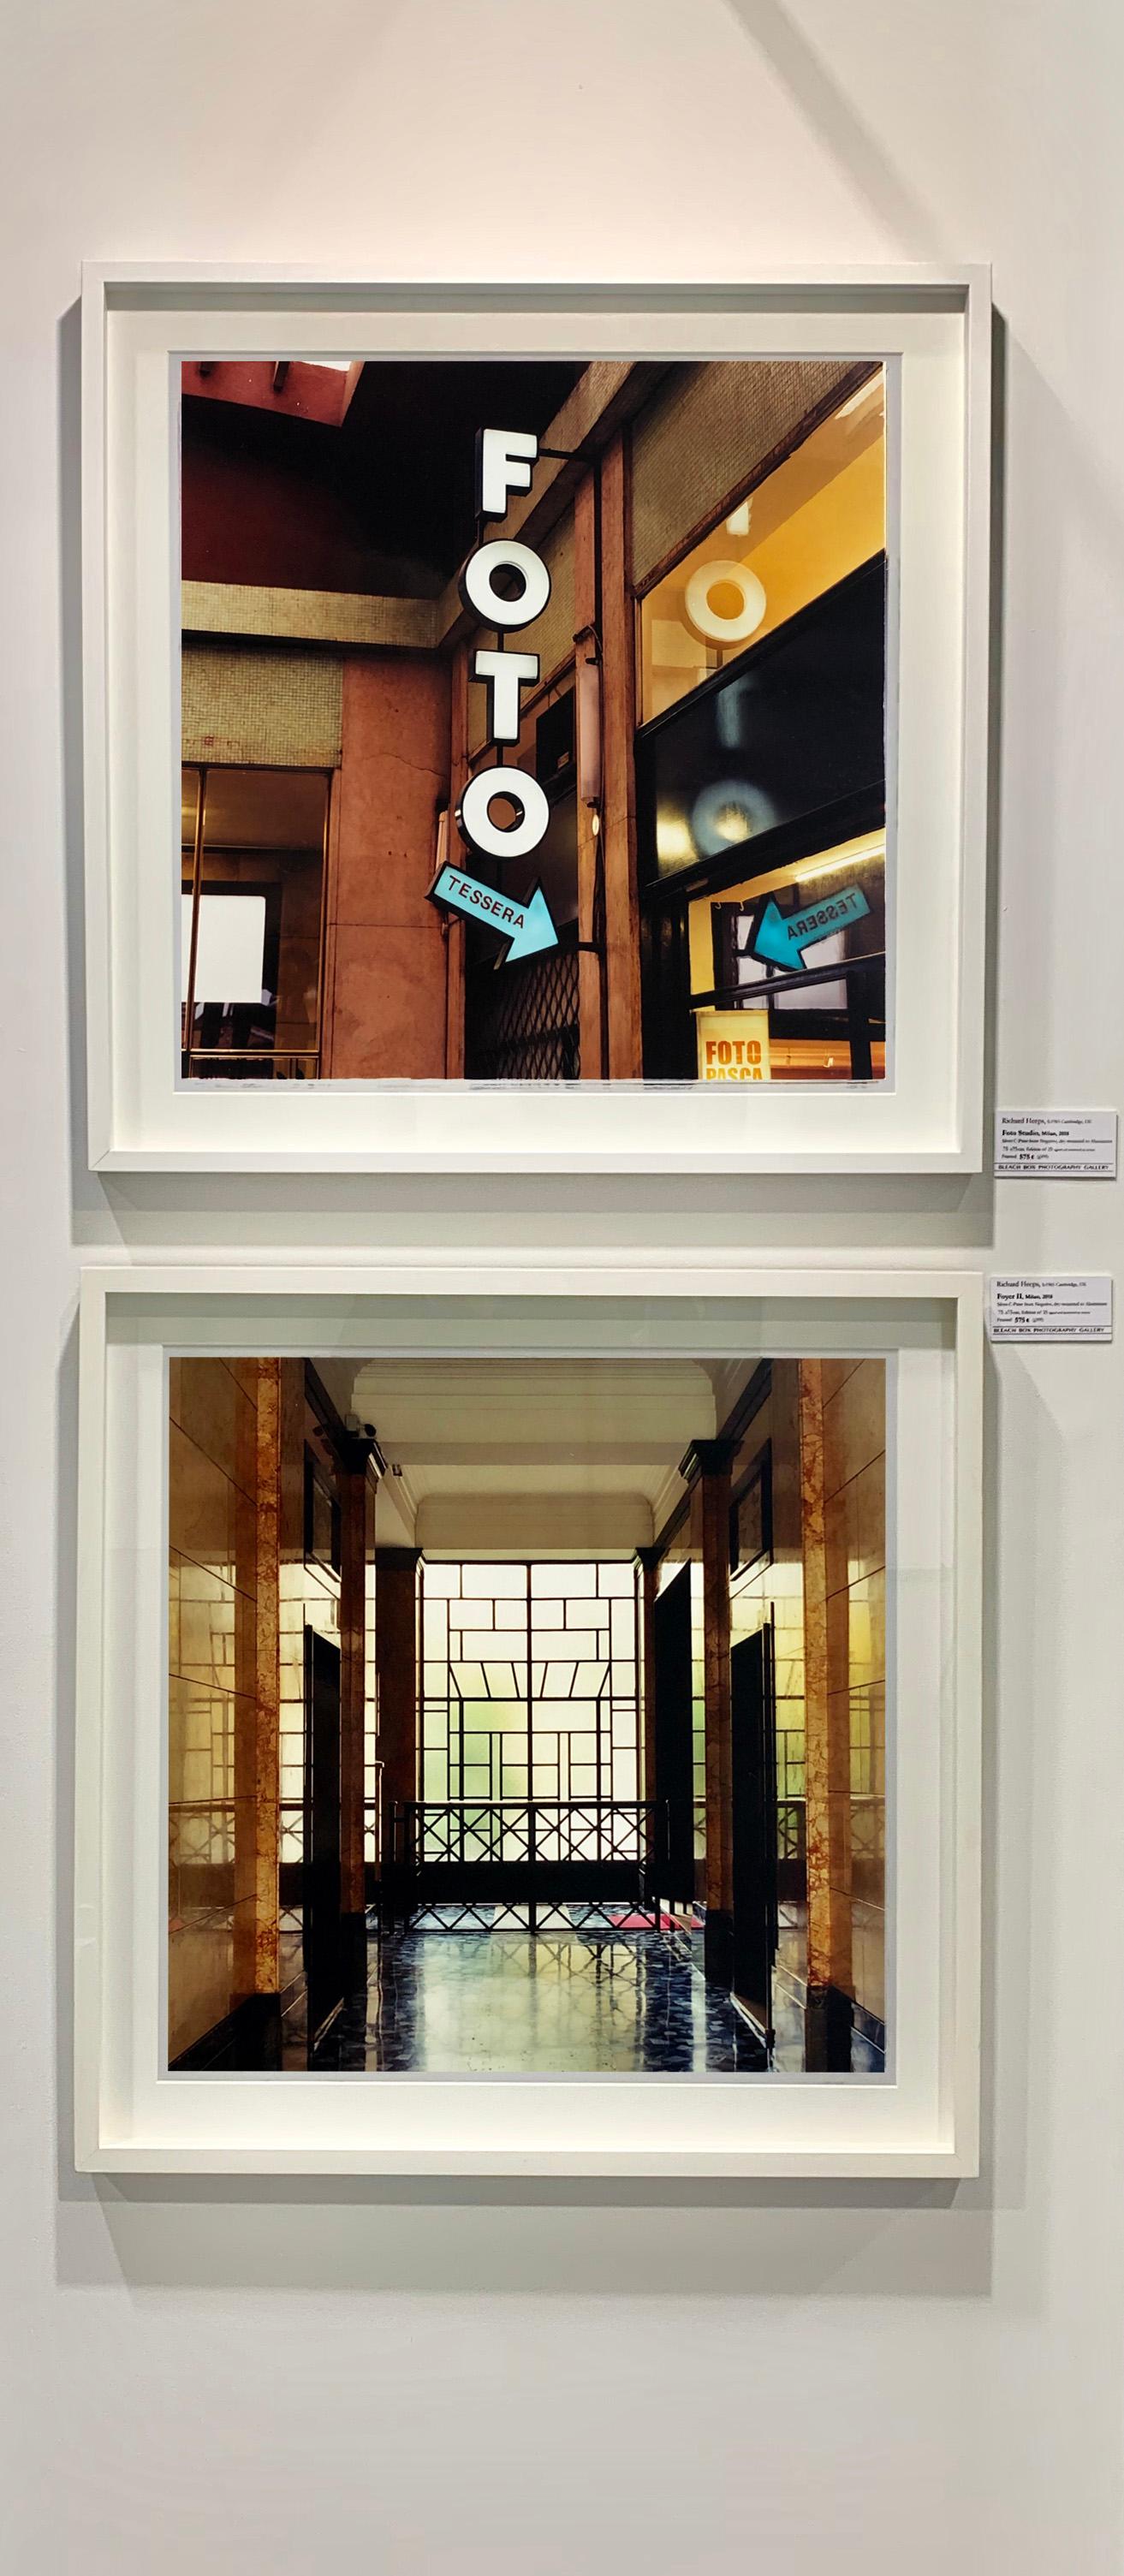 Richard Heeps series A Short History of Milan began as a special project for the 2018 Affordable Art Fair Milan. It was well received and the artwork has become popular with art buyers around the world. Richard continues to add to the collection as